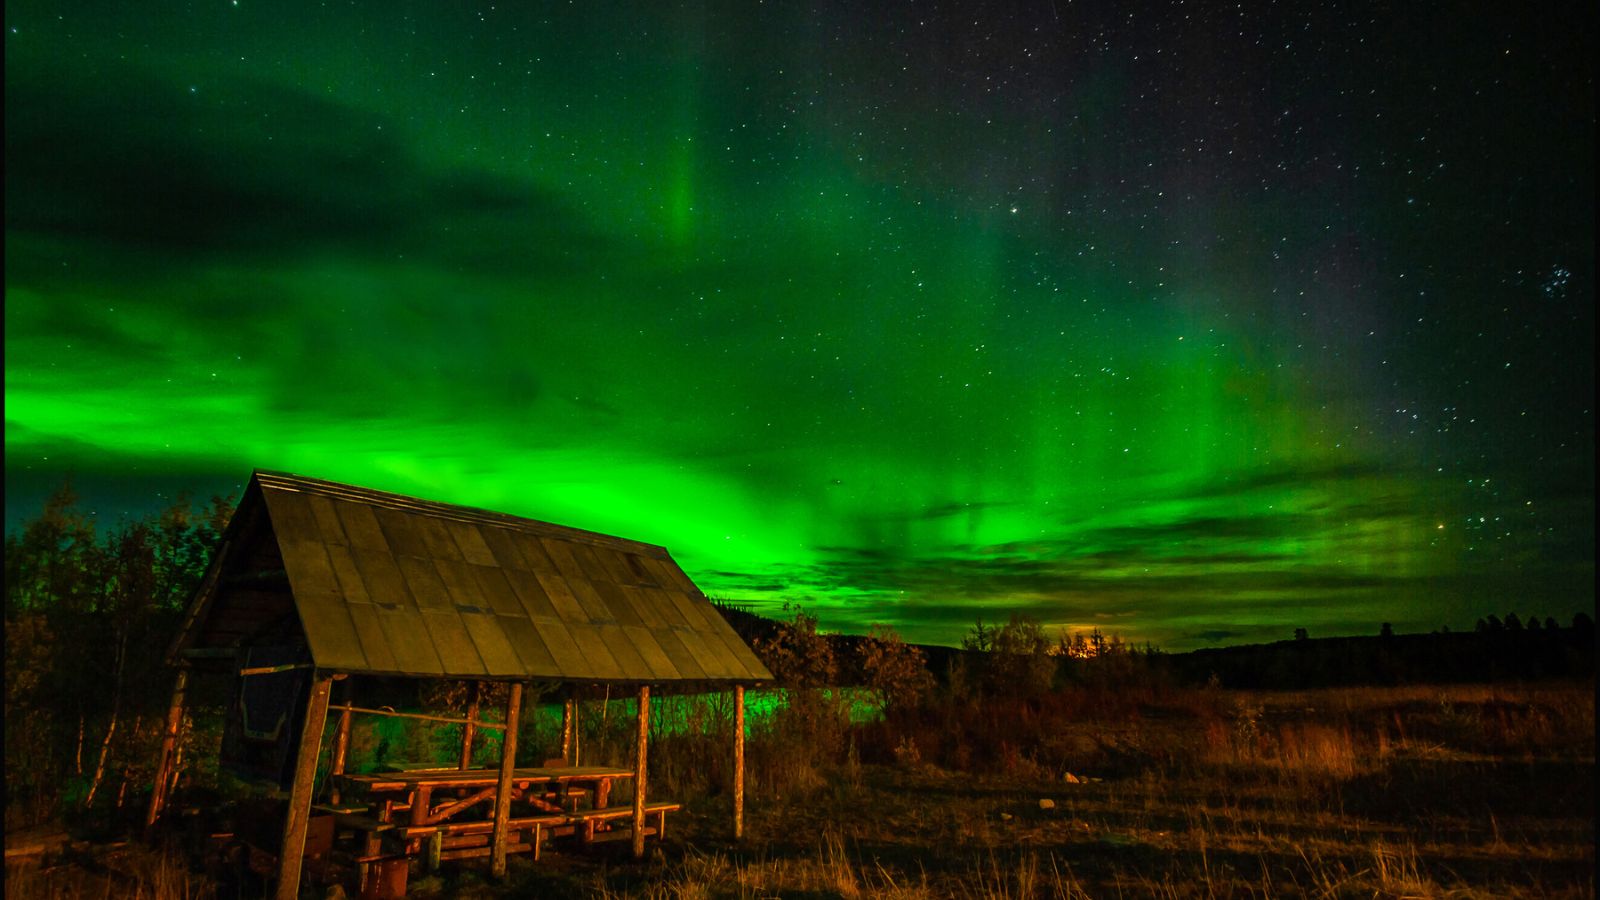 <p>The story goes that God looked down on what he created and dropped diamonds that fell across the Yakutia region, which are the Northern Lights often seen in Siberia. Oymyakon is a remote location, but the trip and time spent with locals in their homes (there are no hotels in the area) will make the journey worth it. </p>